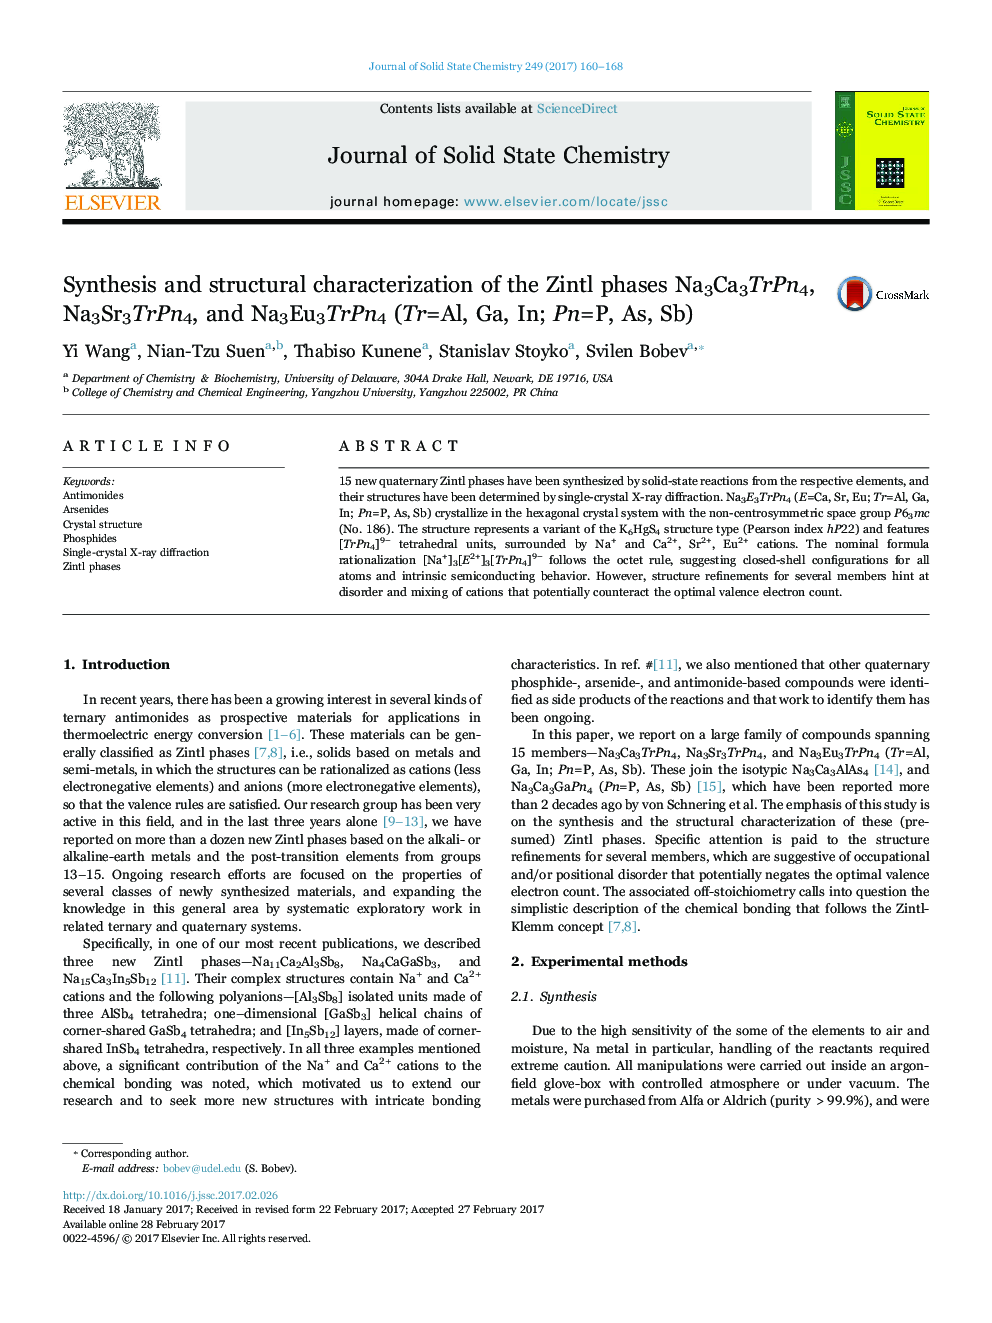 Synthesis and structural characterization of the Zintl phases Na3Ca3TrPn4, Na3Sr3TrPn4, and Na3Eu3TrPn4 (Tr=Al, Ga, In; Pn=P, As, Sb)